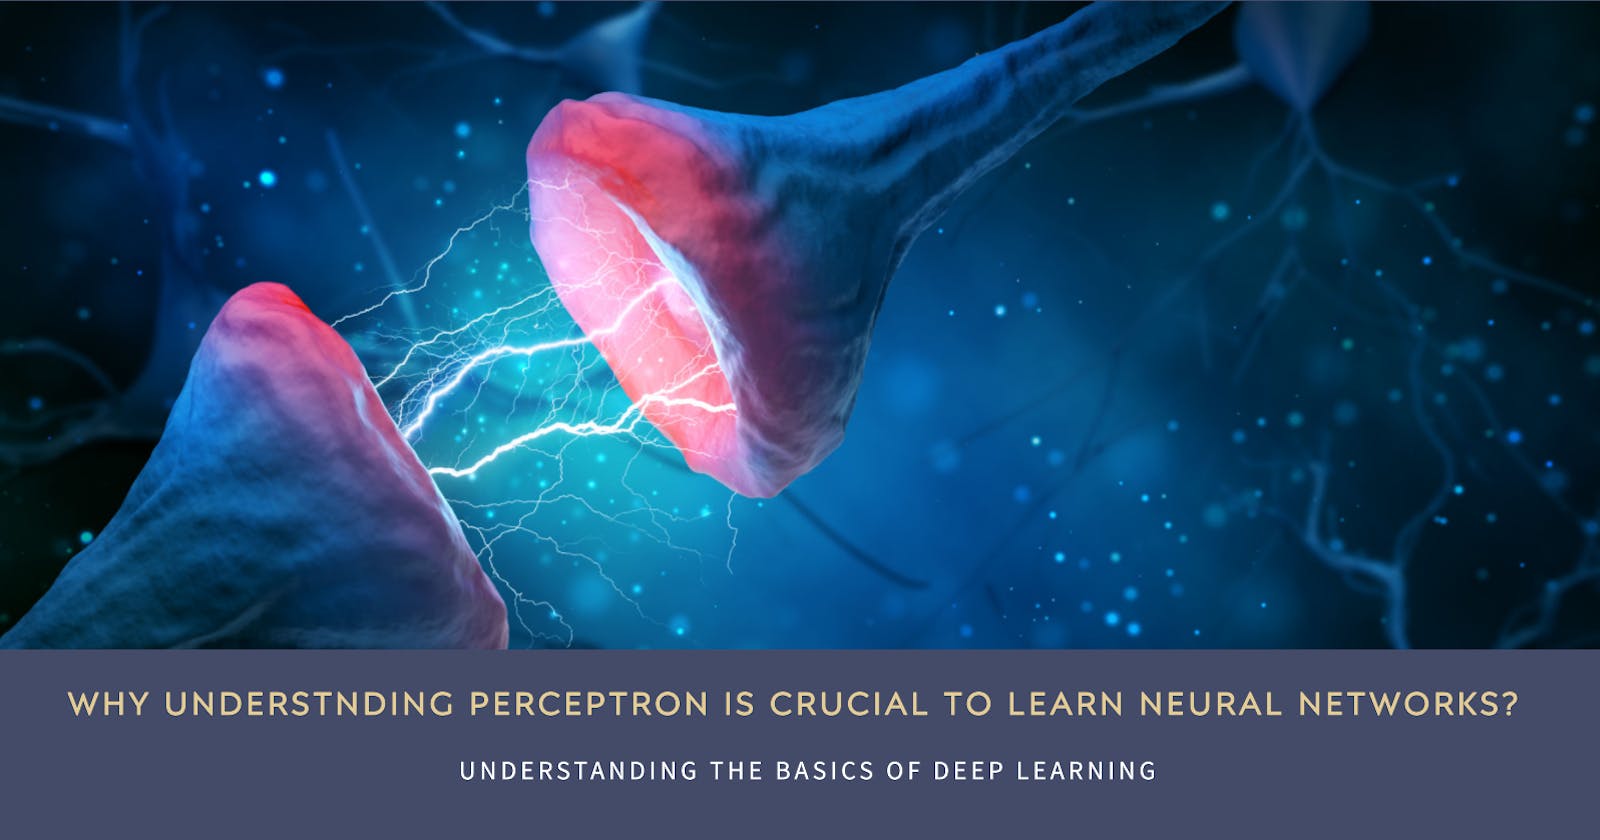 What is perceptron and why it is important to understand neural networks?